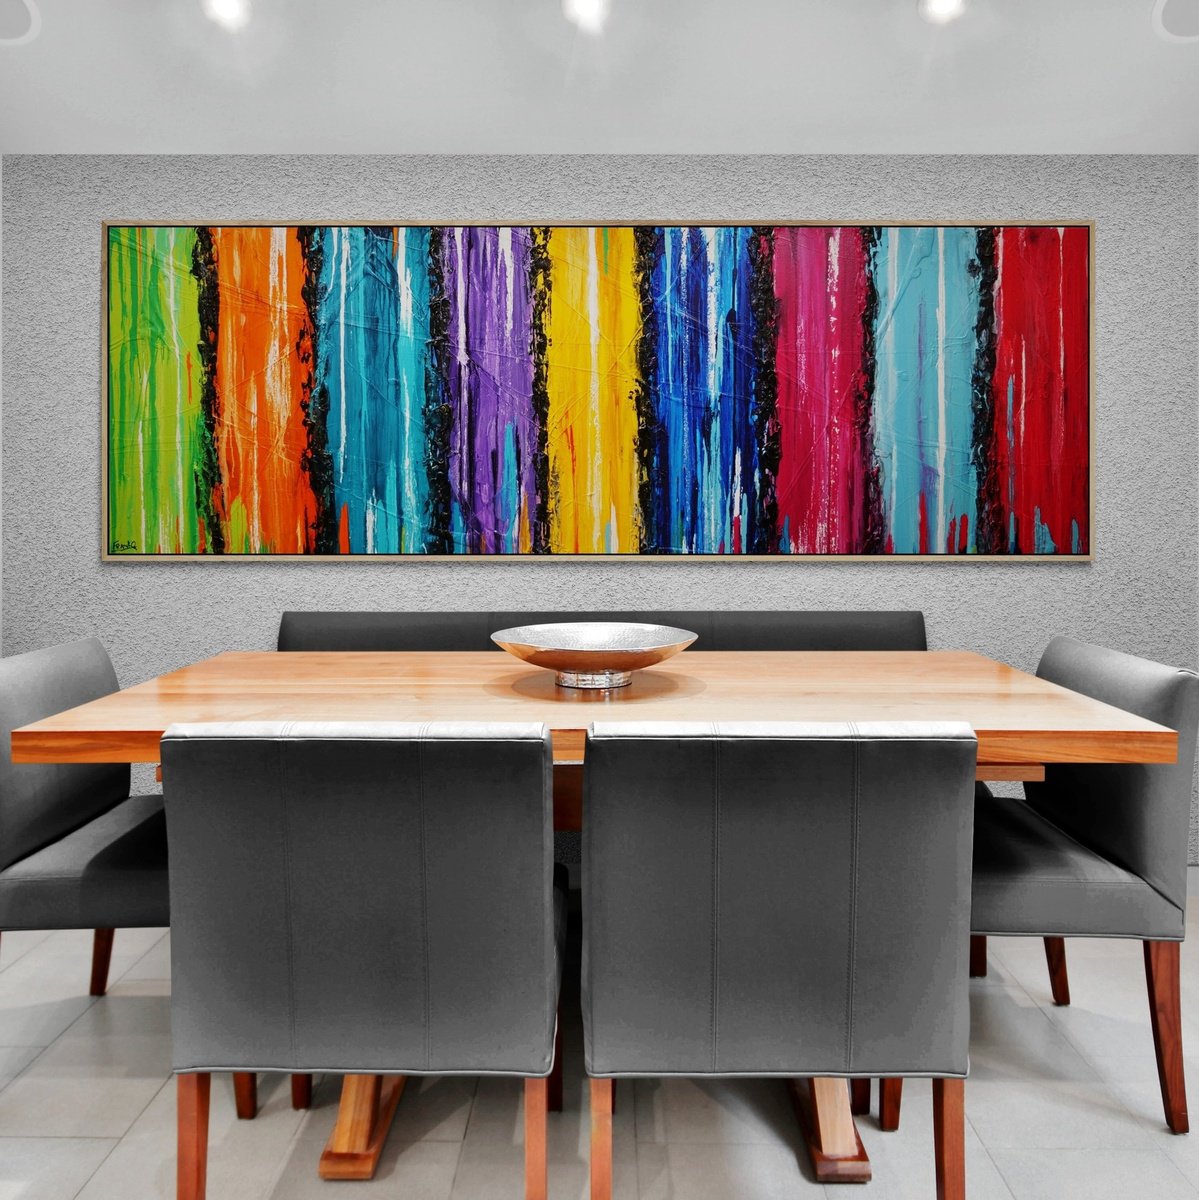 Colourtech 295cm x 100cm Textured Abstract Art by Franko